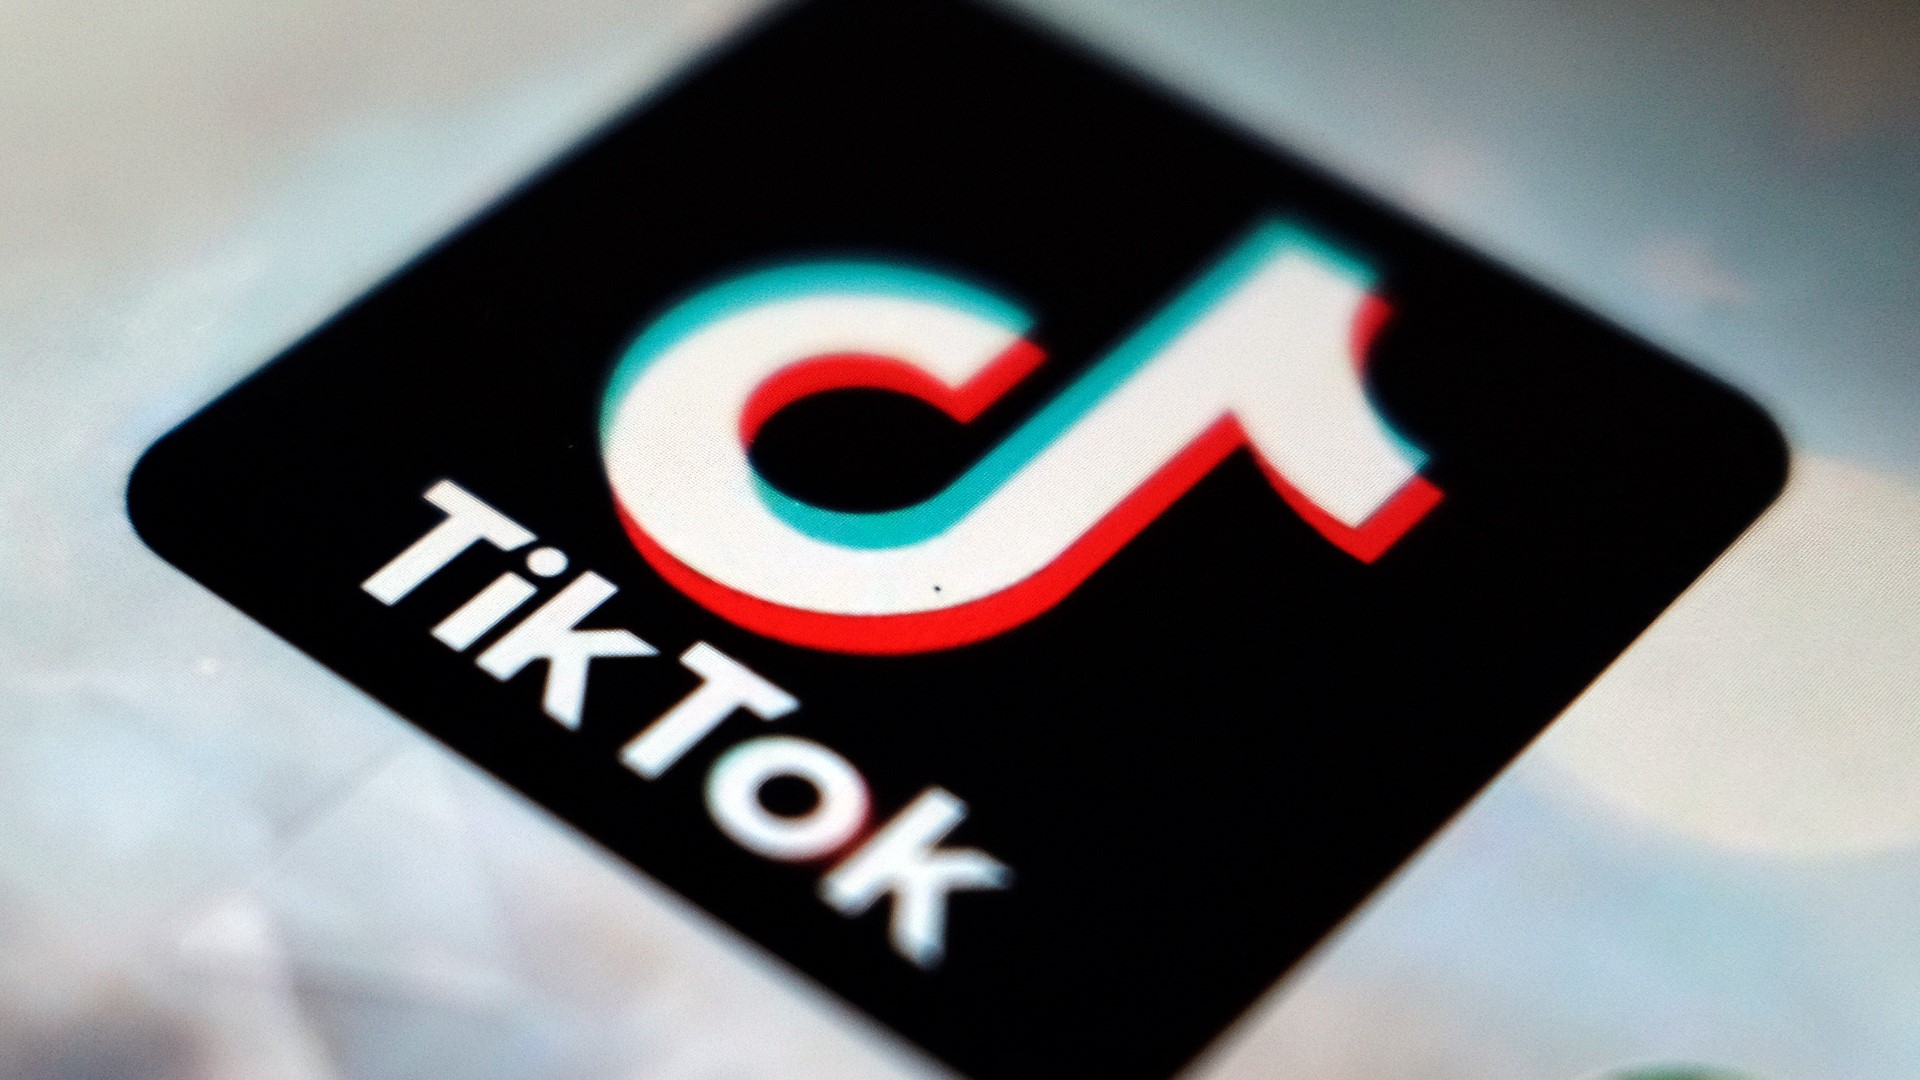 TikTok is consumed by two-thirds of American teens and has become the second-most popular domain in the world.